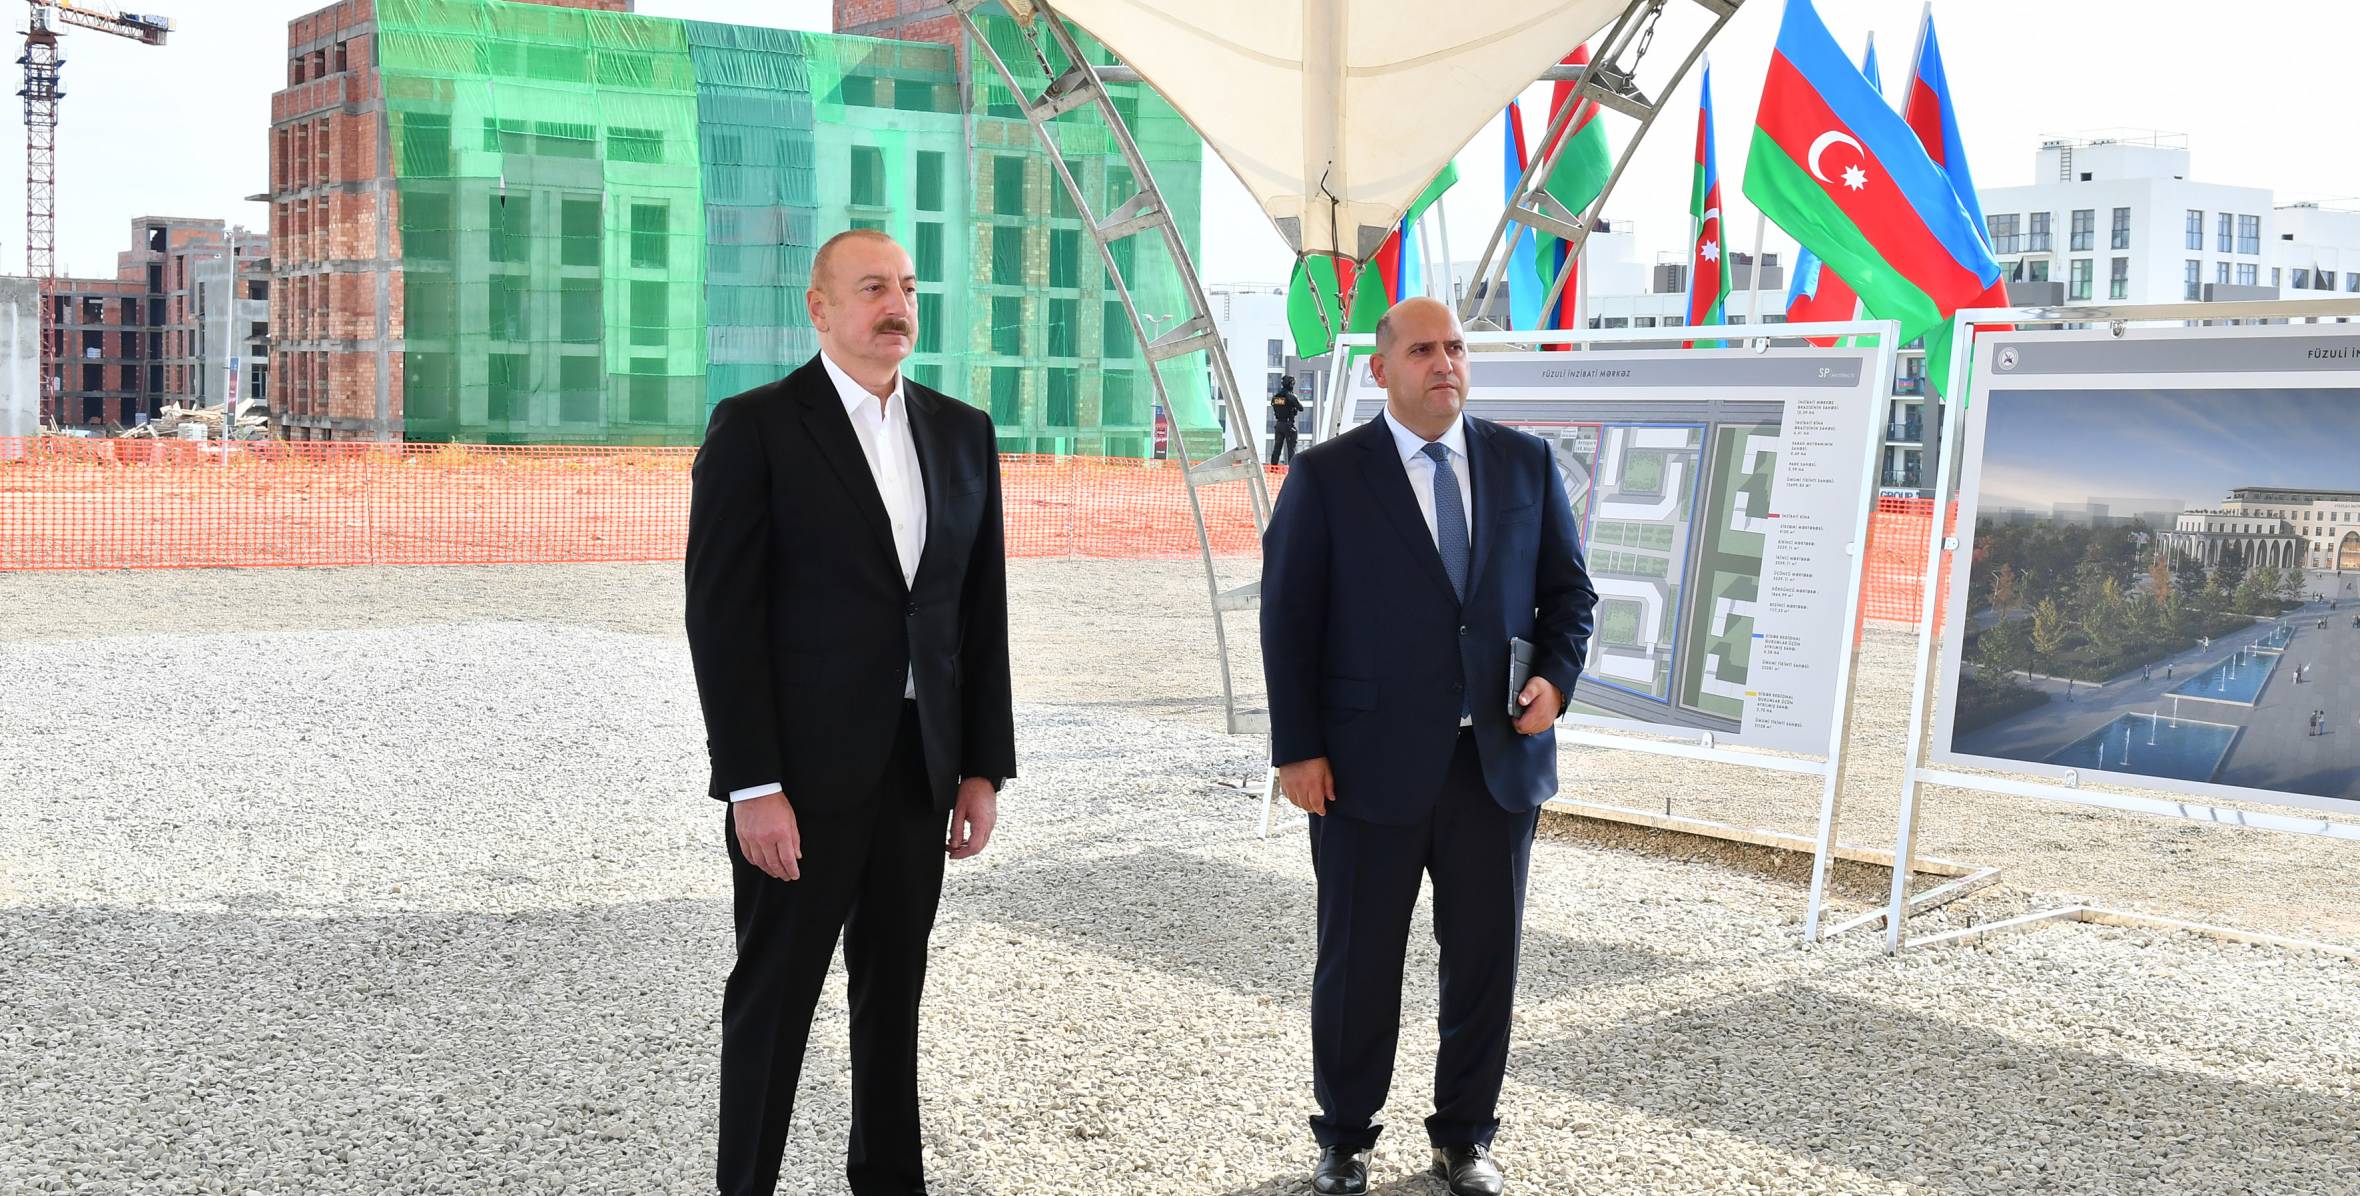 Ilham Aliyev has laid a foundation stone for an administrative building in the city of Fuzuli